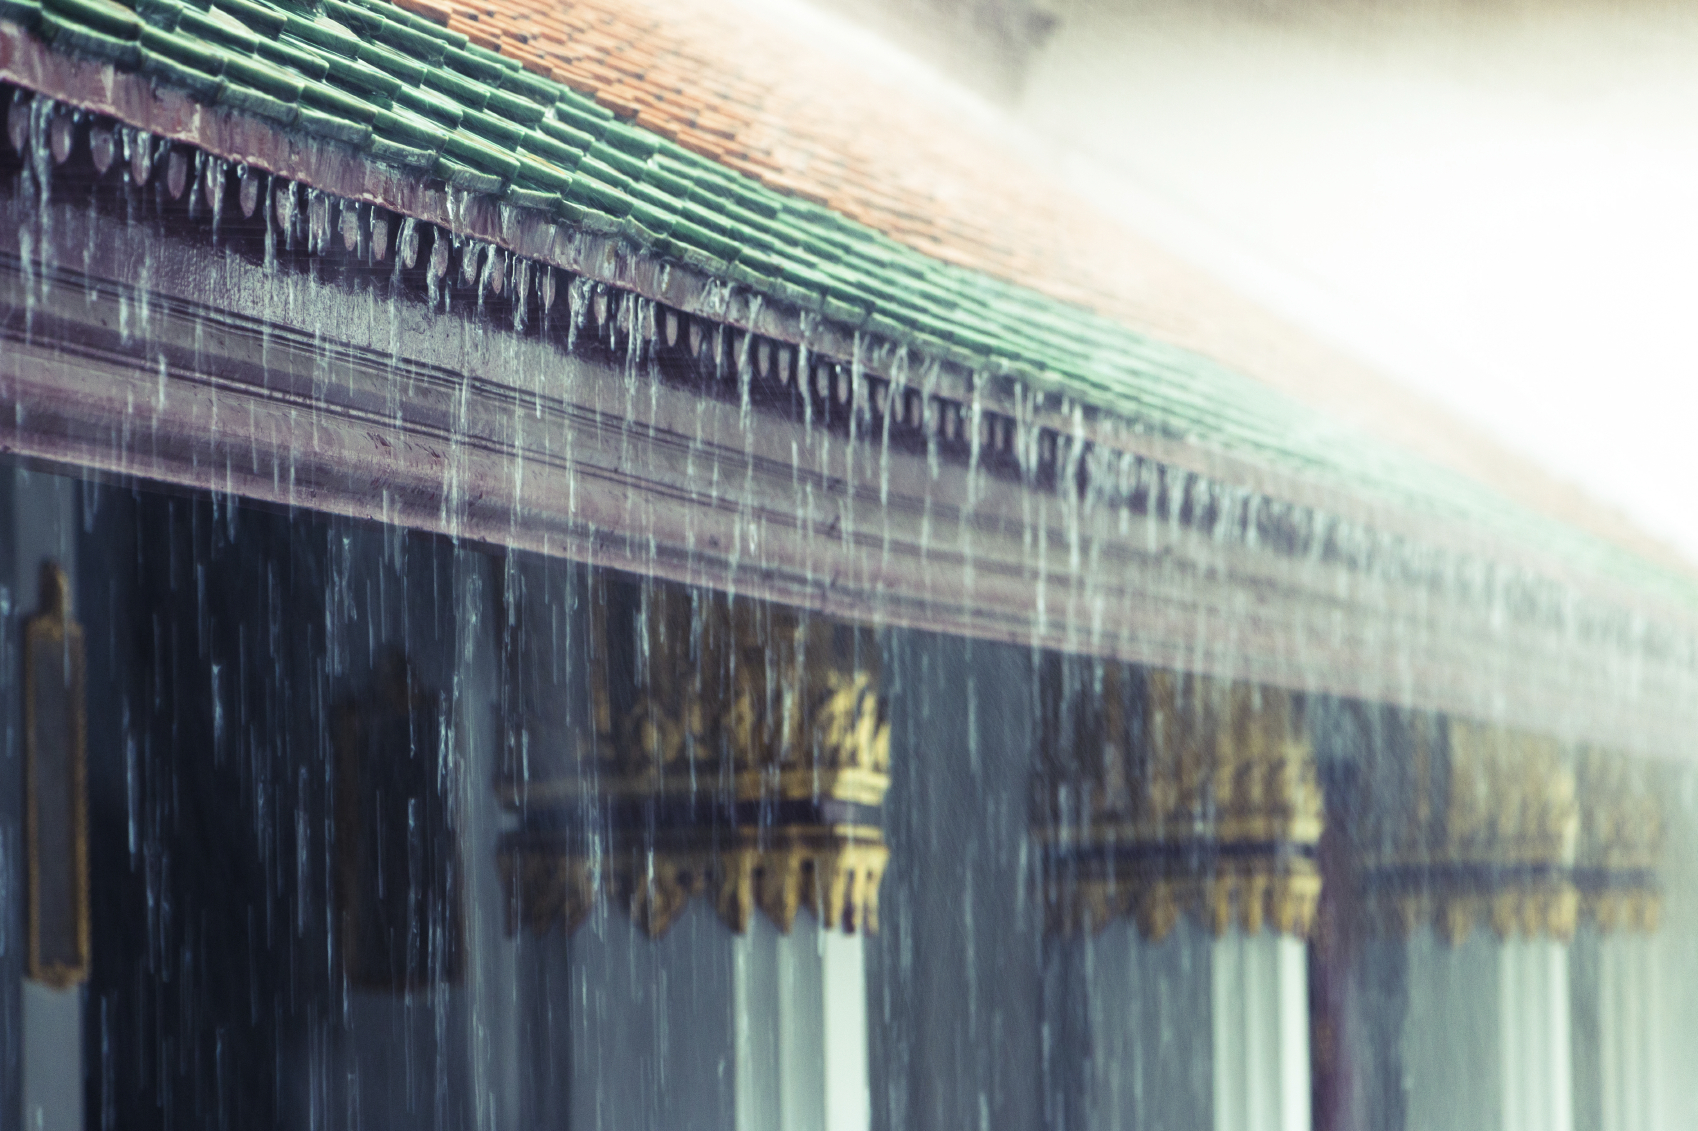 buddism temple roof in the rain